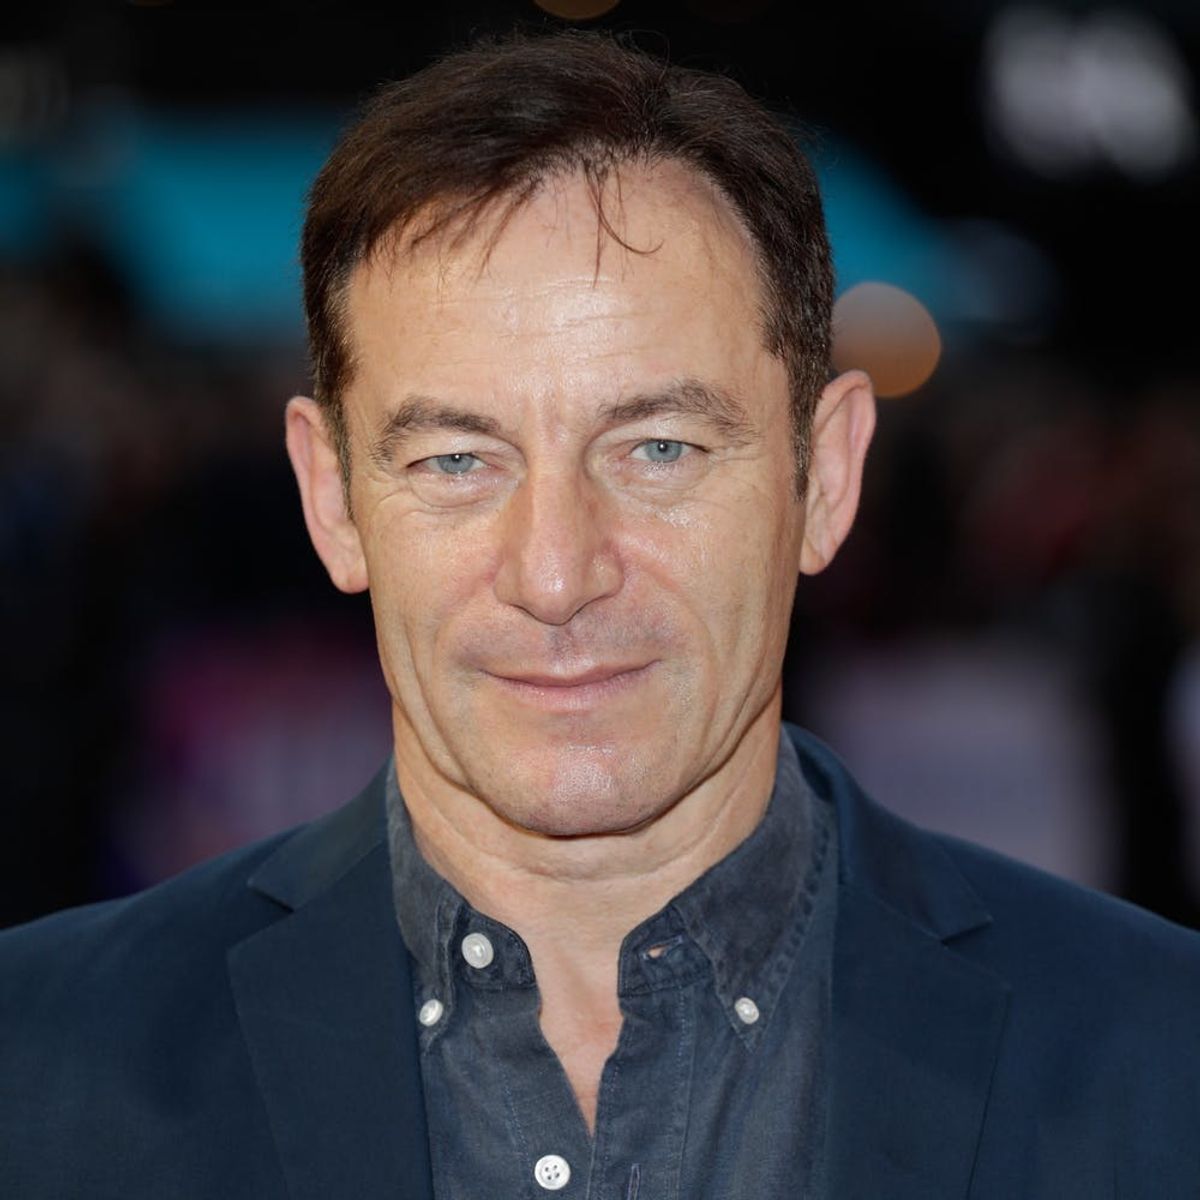 Jason Isaacs Almost Turned Down the Role of Lucius Malfoy in “Harry Potter”